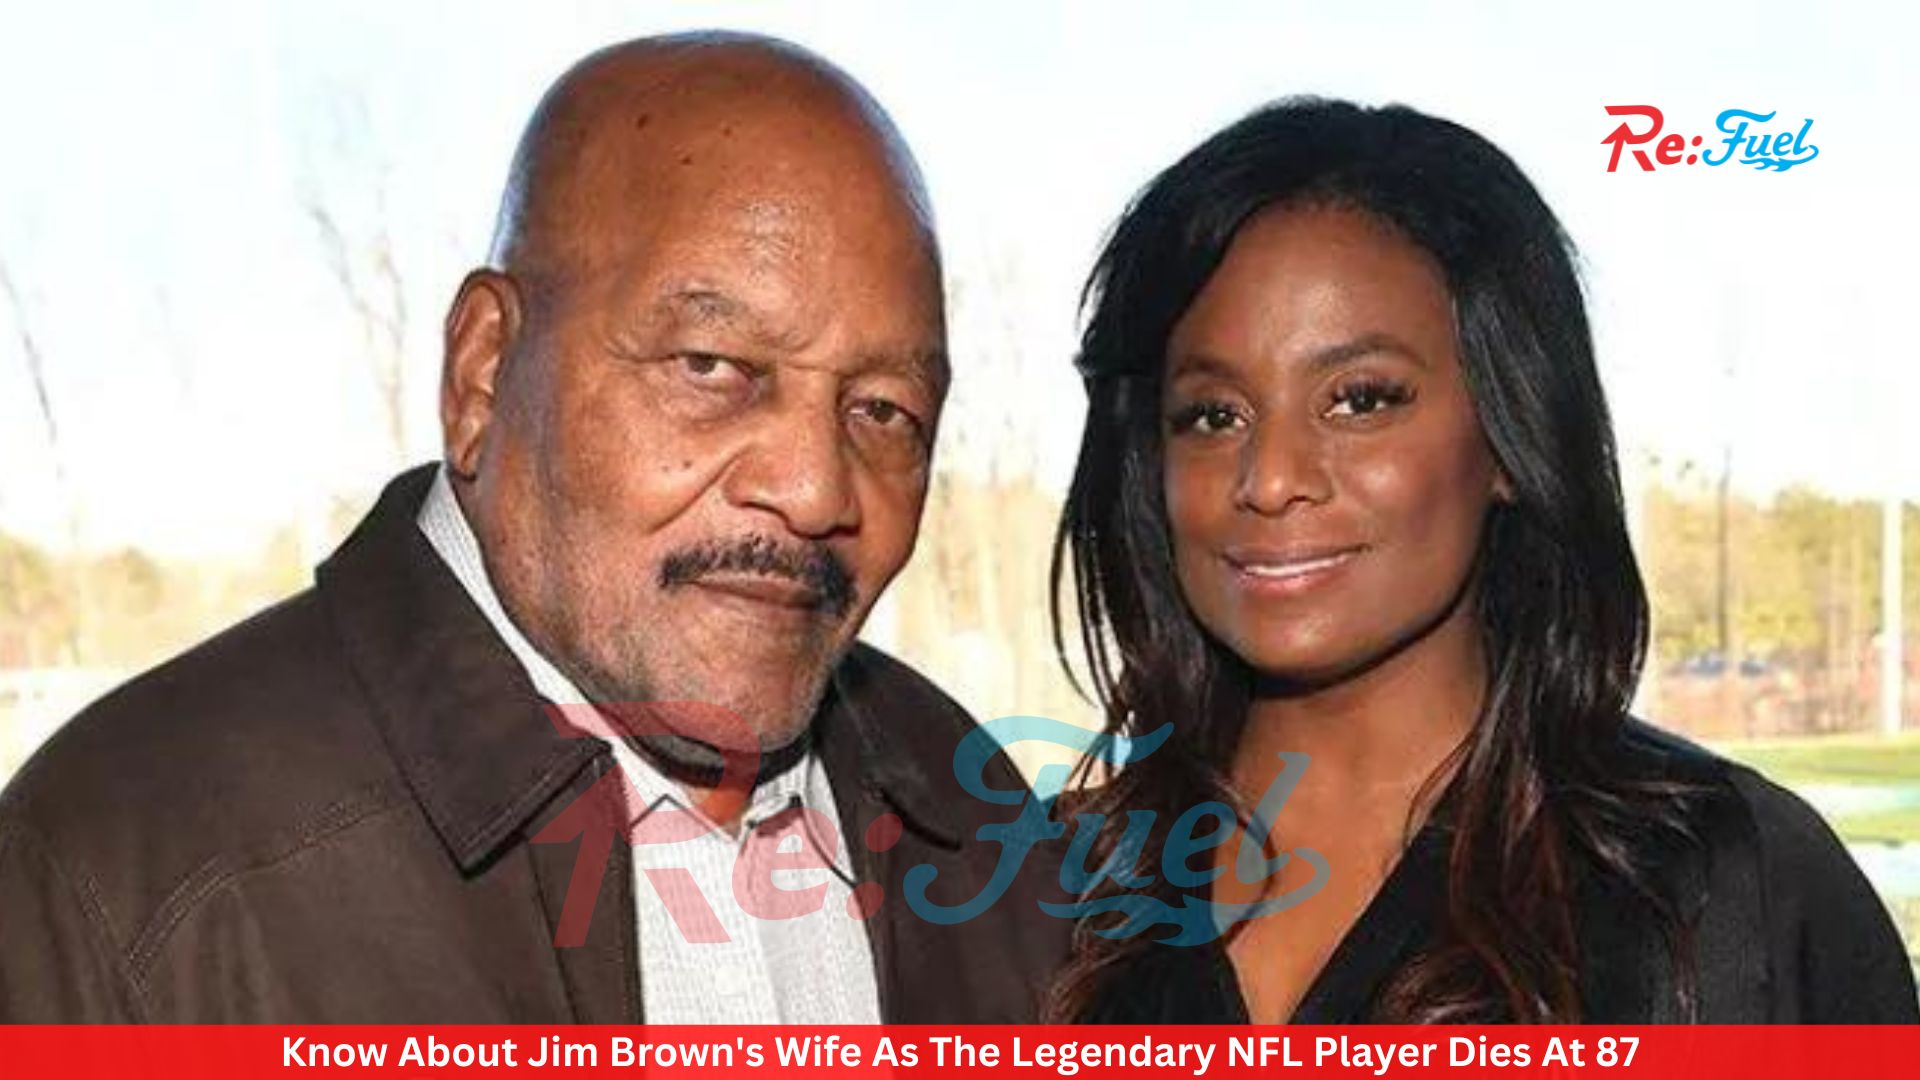 Know About Jim Brown's Wife As The Legendary NFL Player Dies At 87